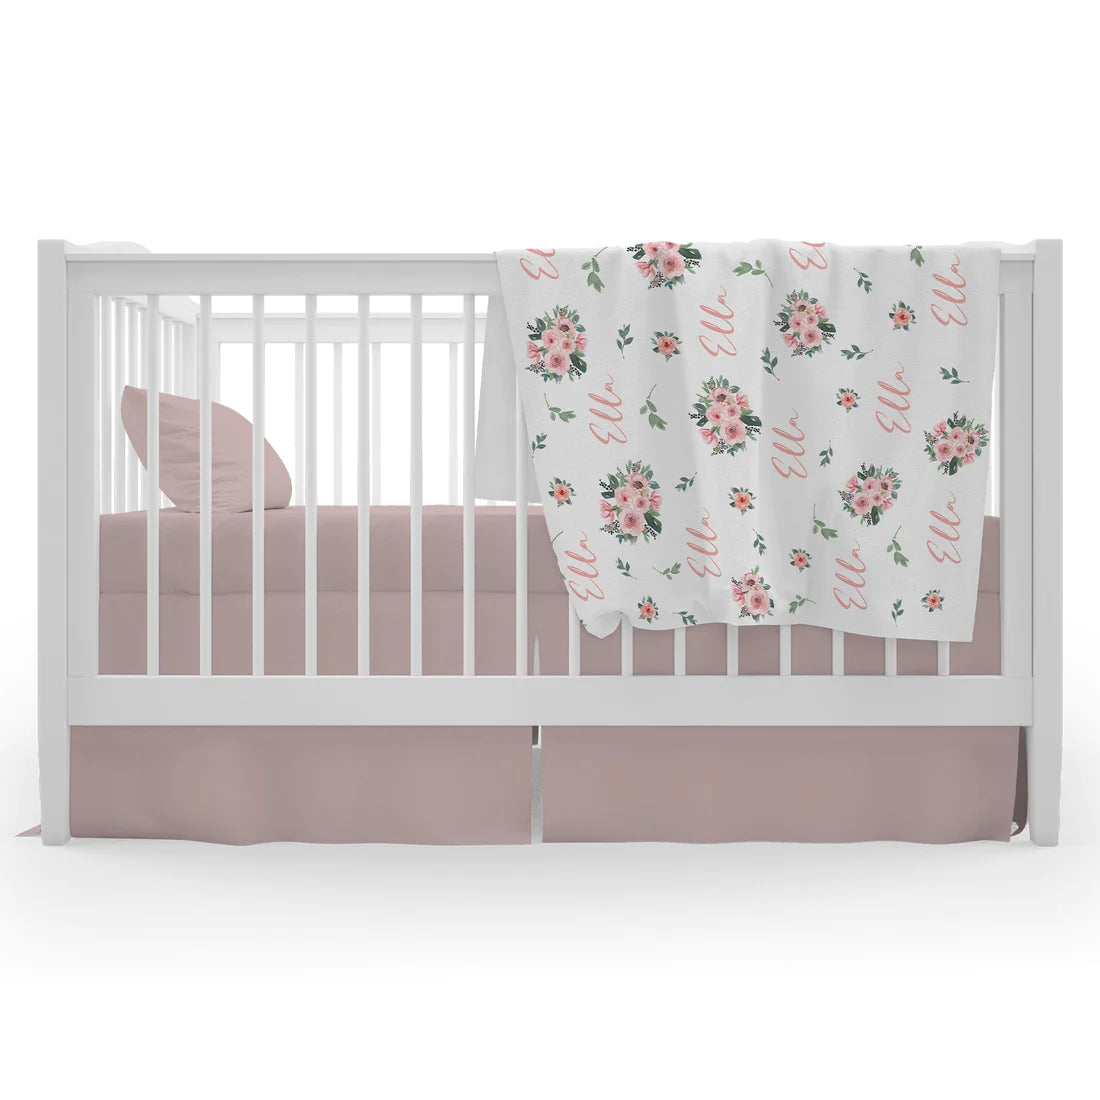 Blushing Floral Pattern Personalized Baby Blanket